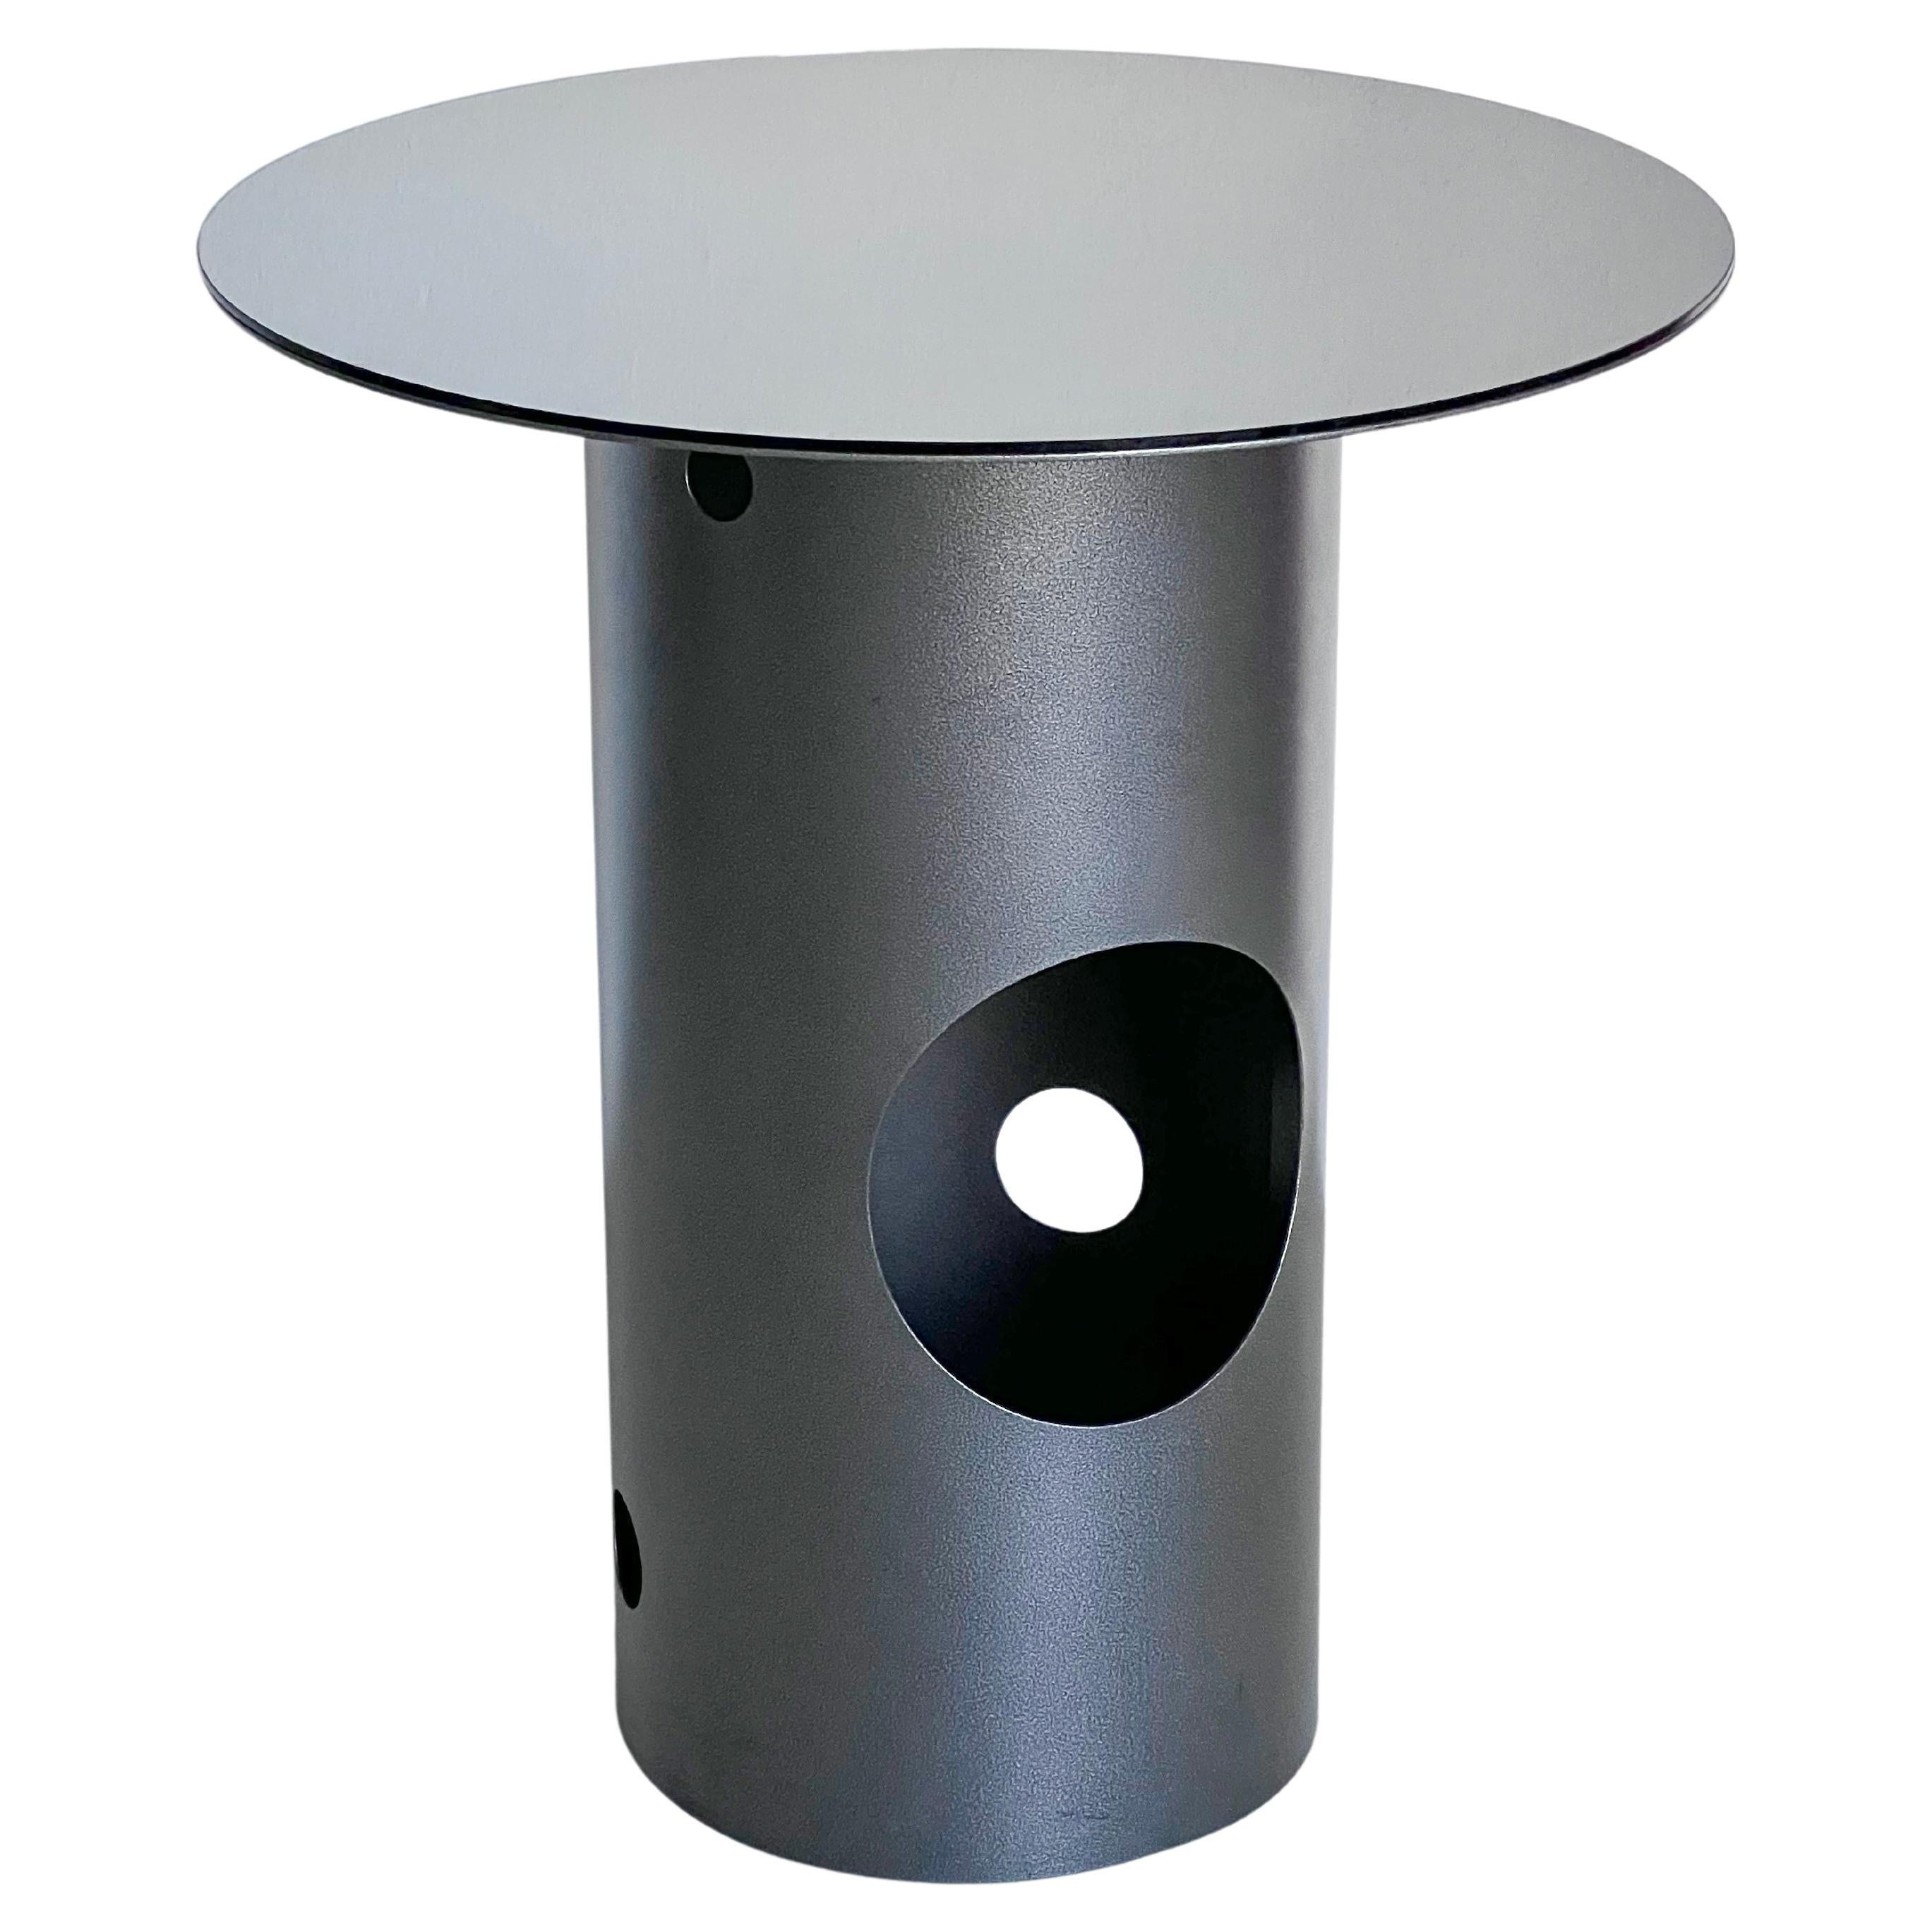 21st Century Contemporary Dining Table, Grey, Mirror Top For Sale